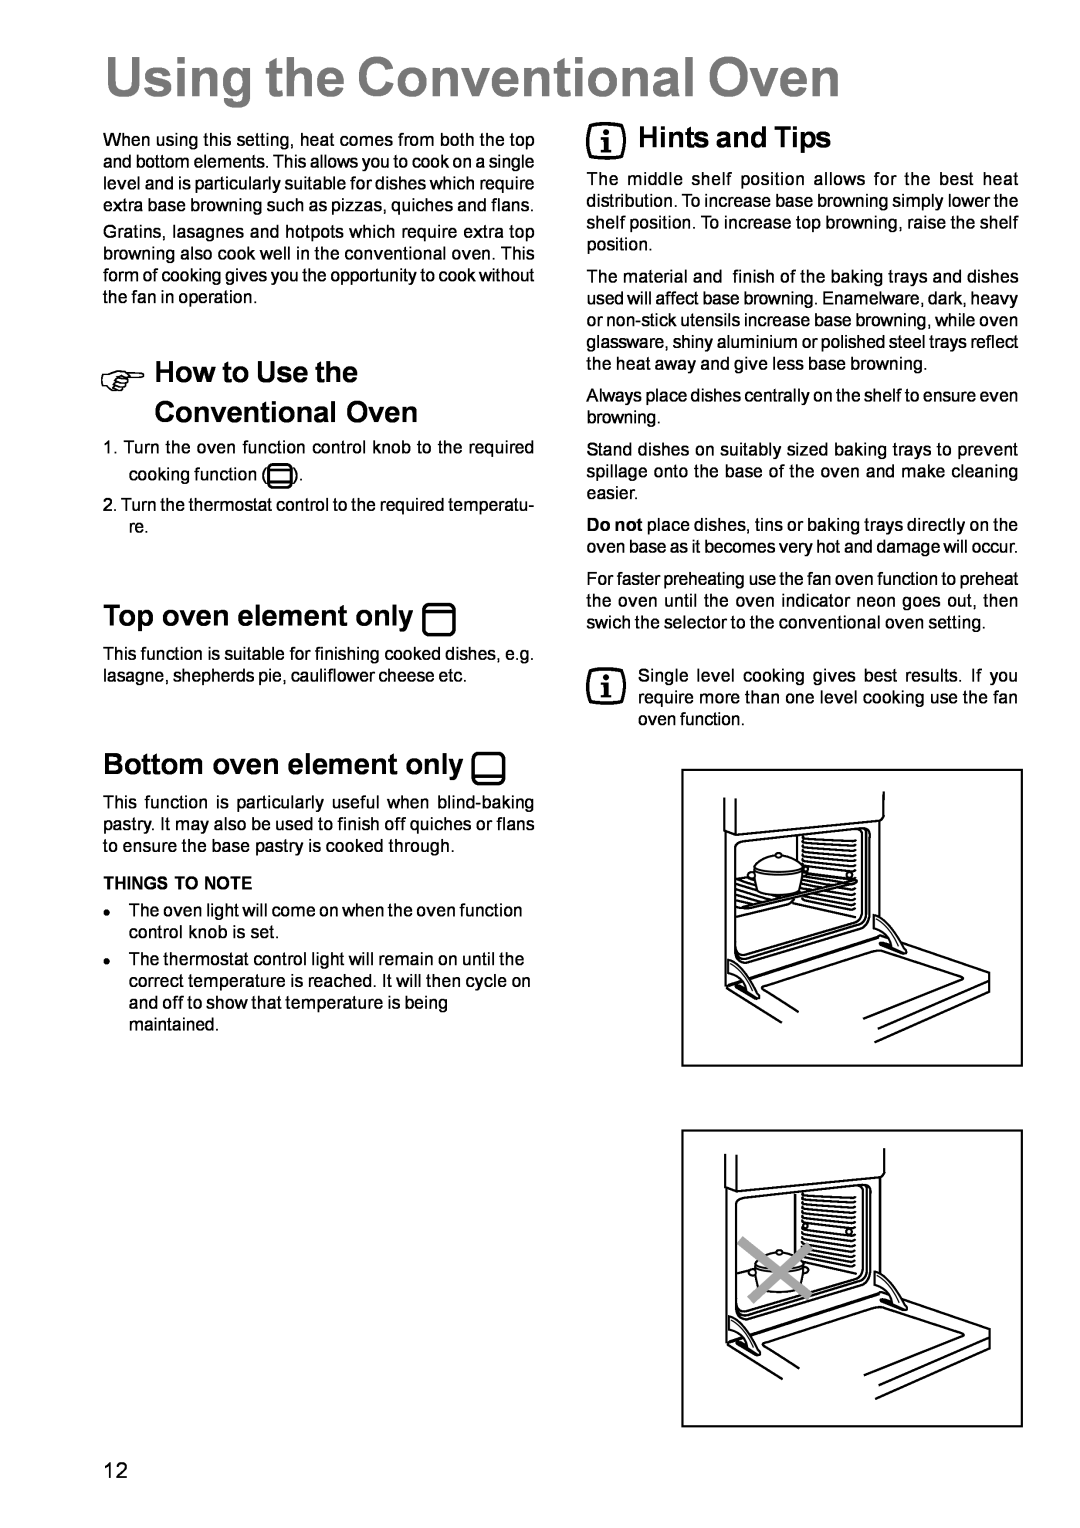 Zanussi ZCE 700 Using the Conventional Oven, Φ How to Use the Conventional Oven, Top oven element only, Hints and Tips 